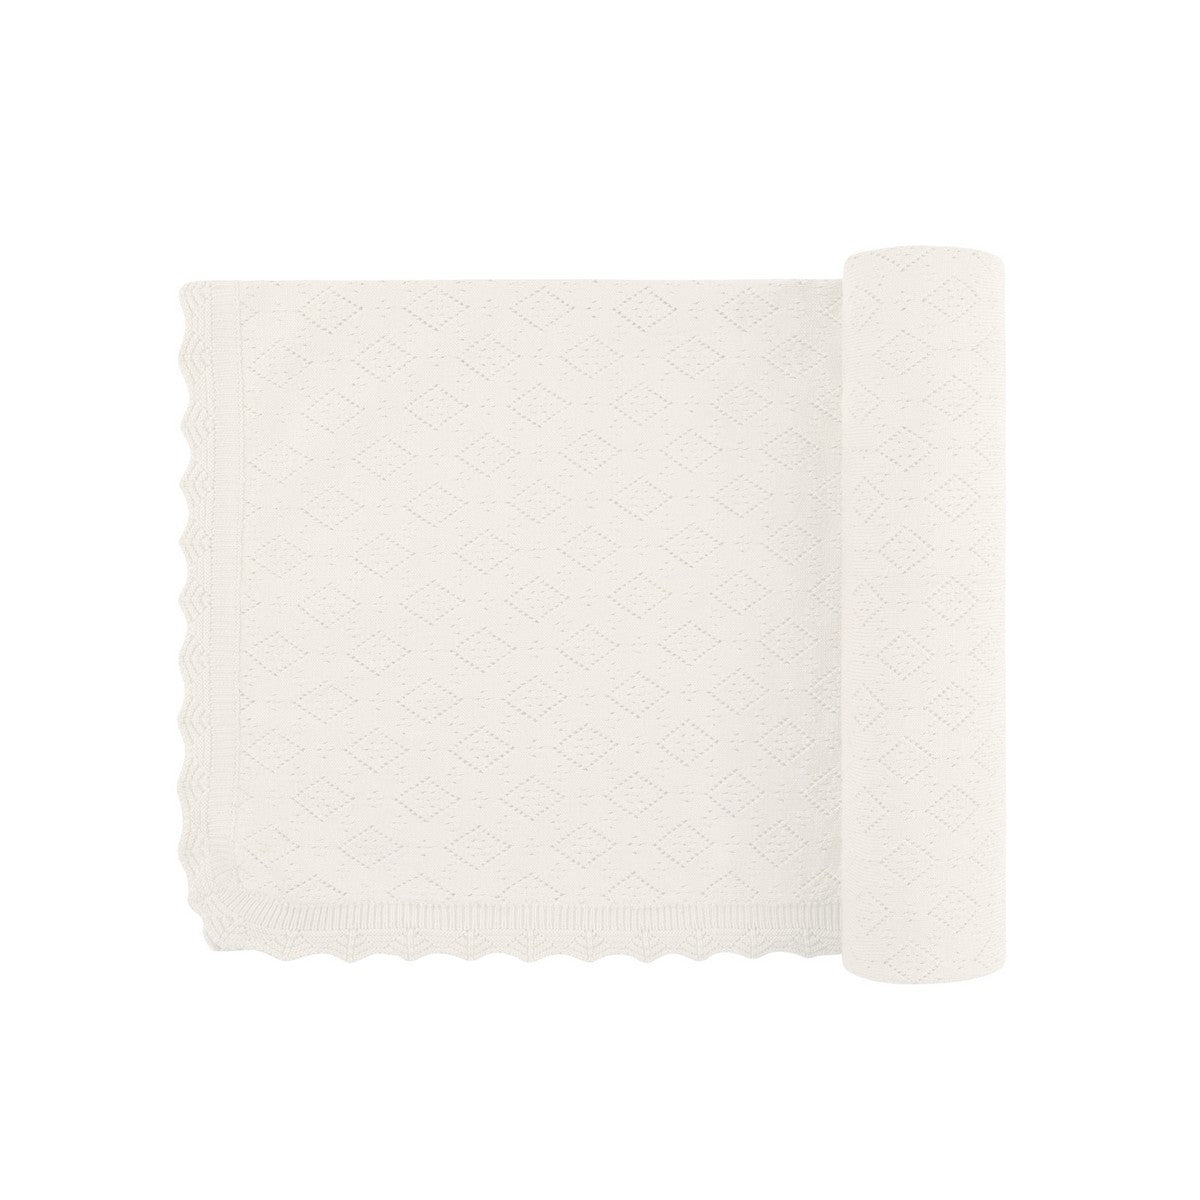 Ely's & Co Ivory Pointelle Knit Blanket